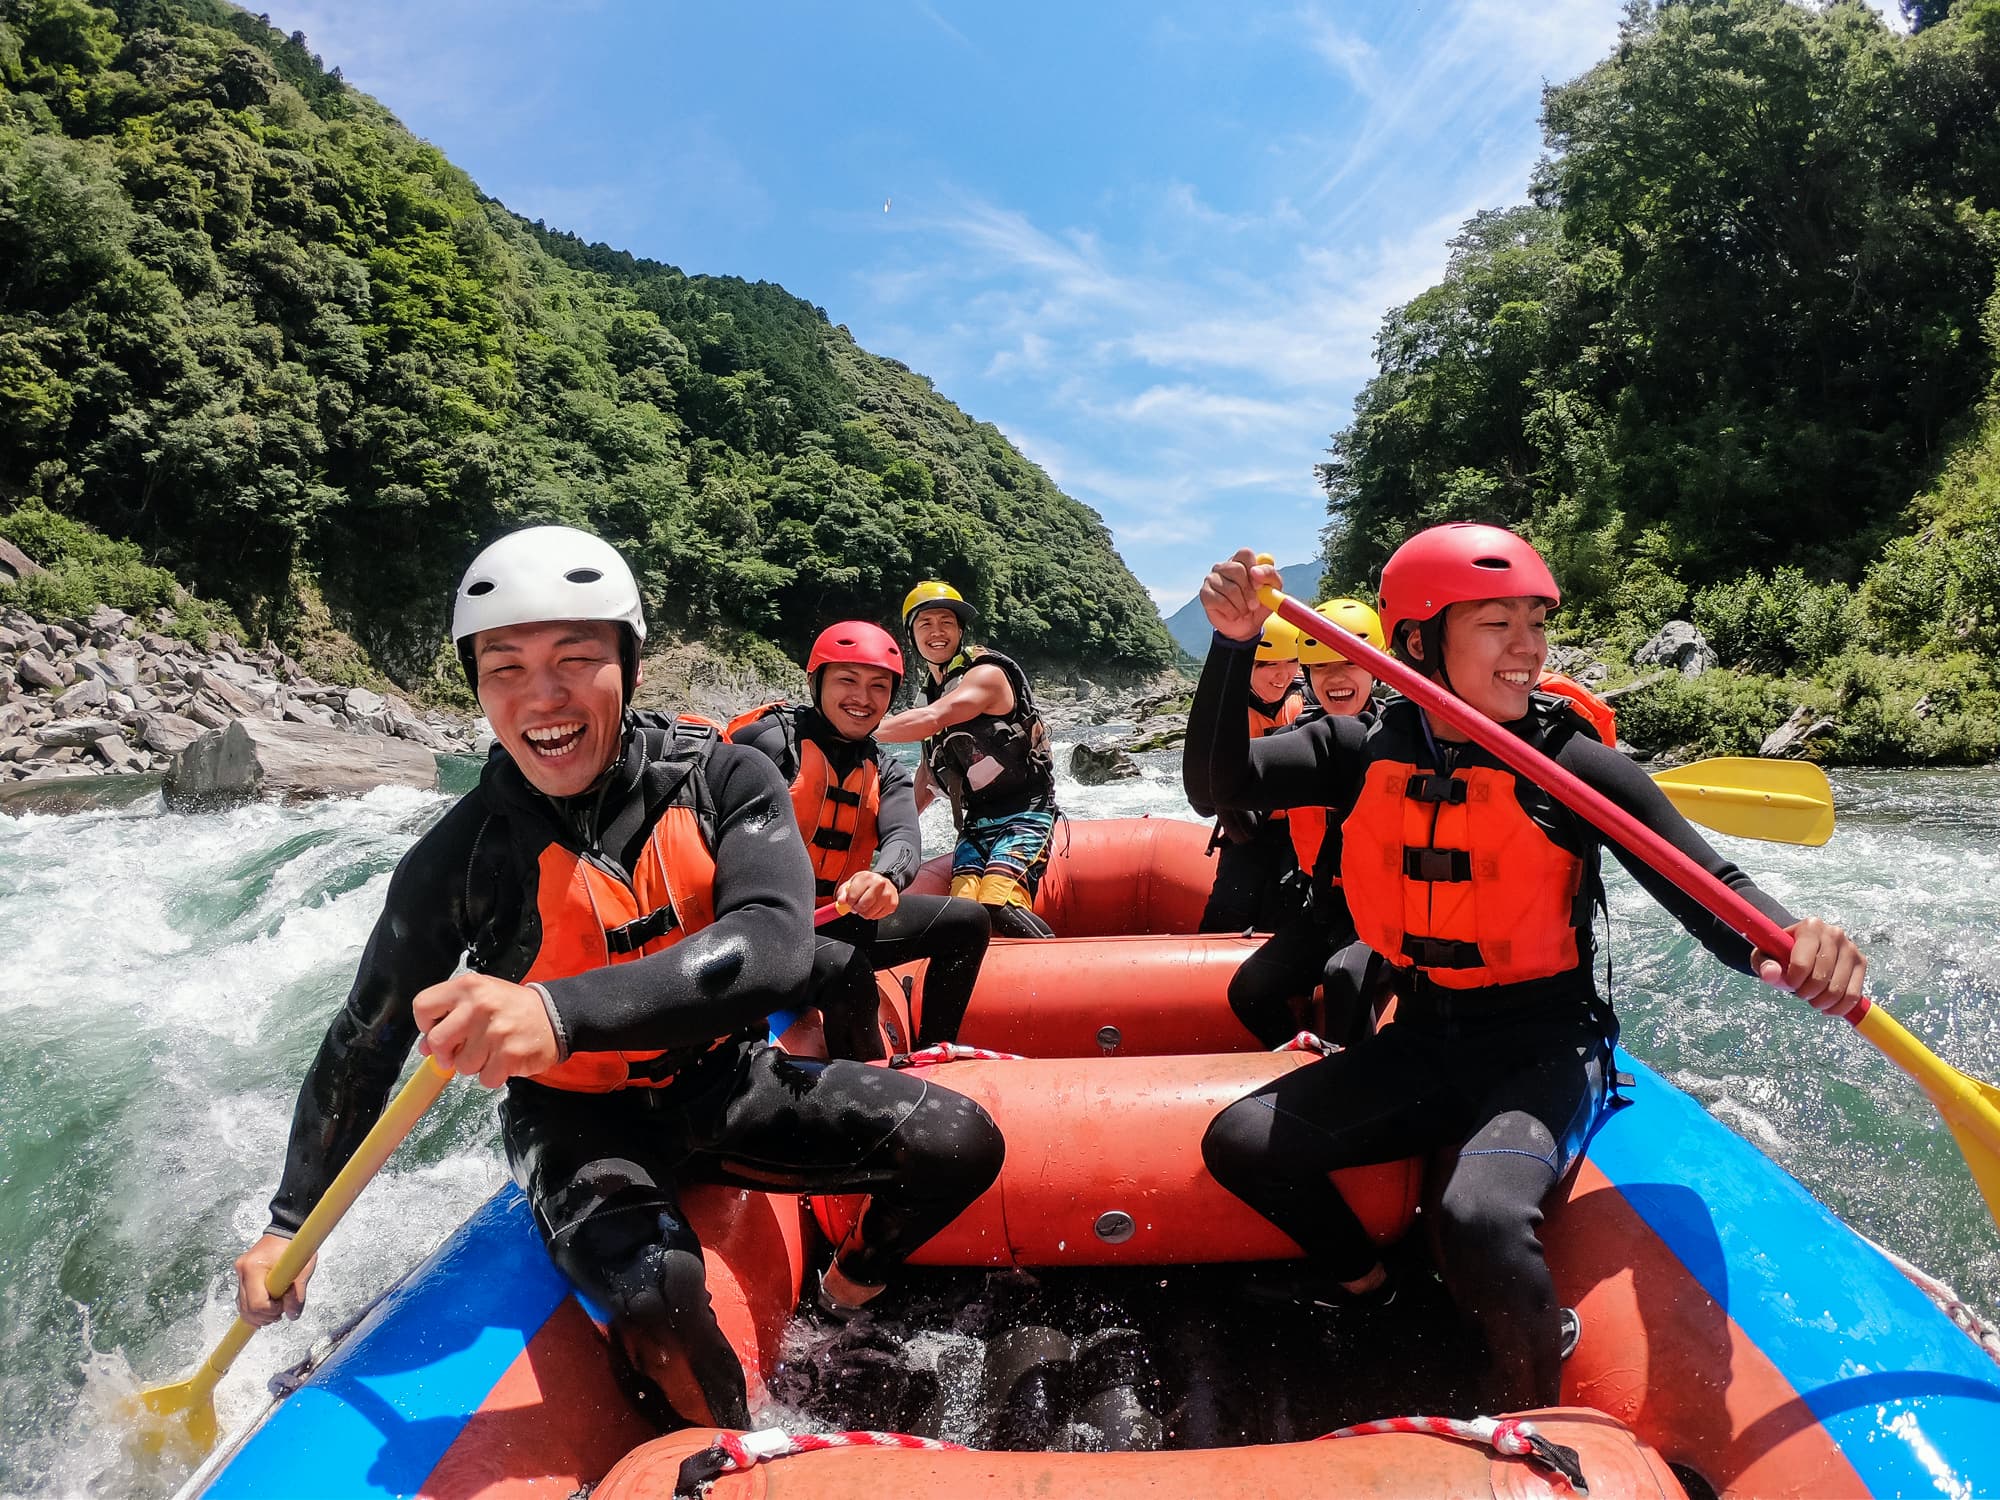 six people in a raft on a river